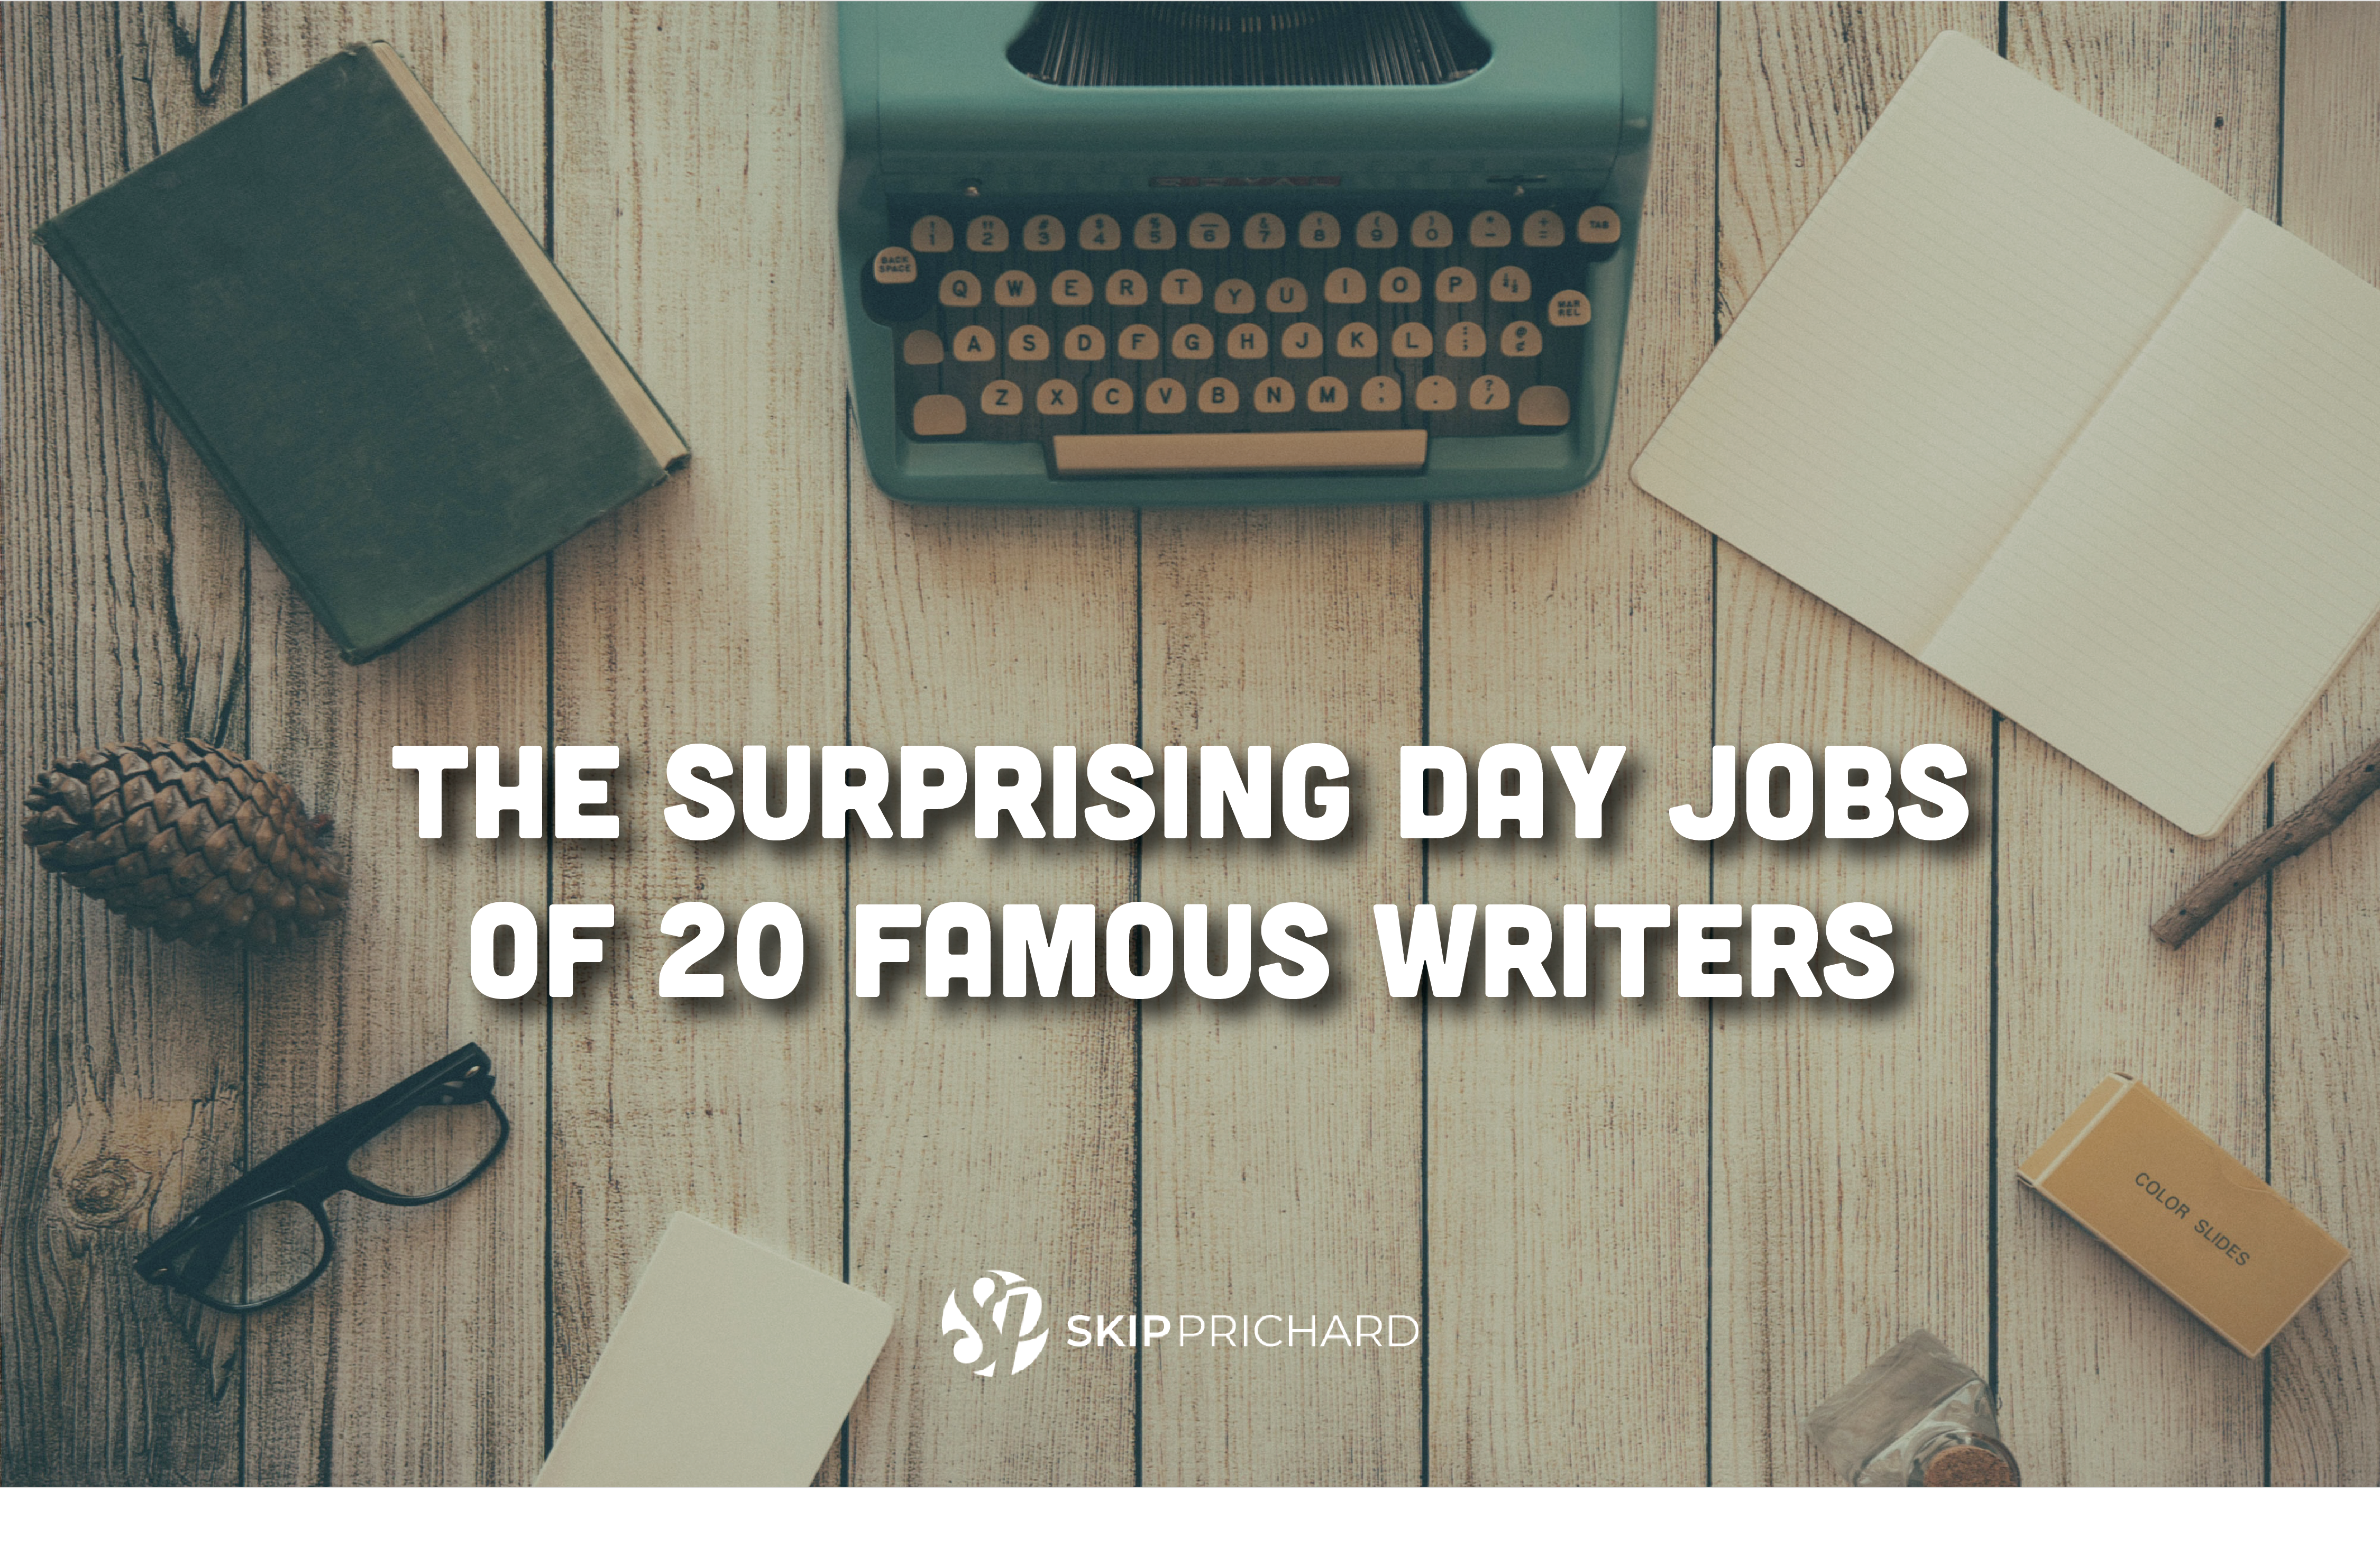 The surprising day jobs of 20 famous writers